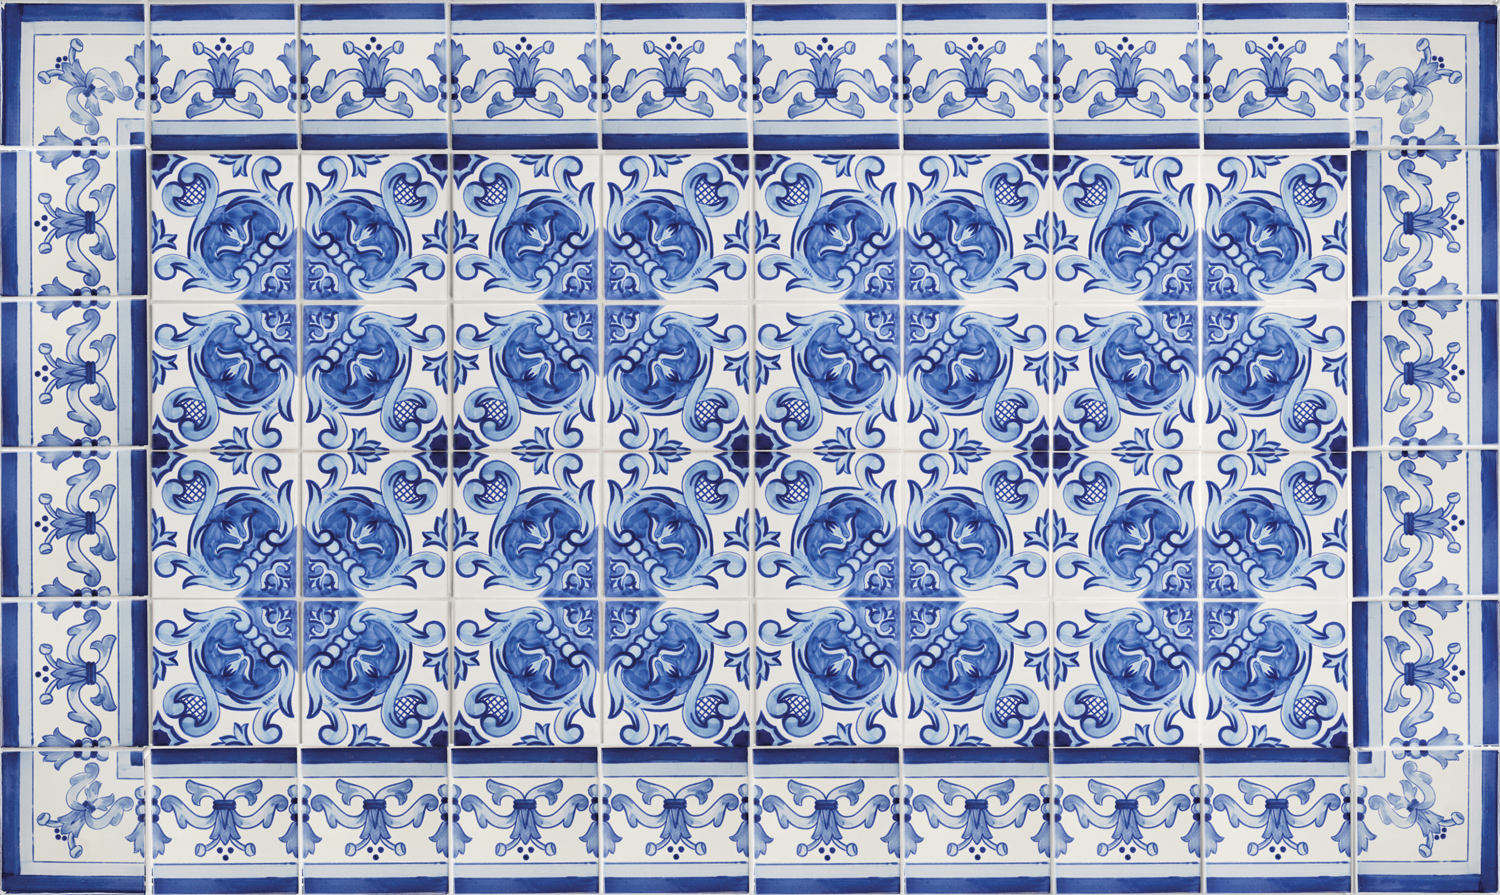 Blue-and-white patterned tiles from cle